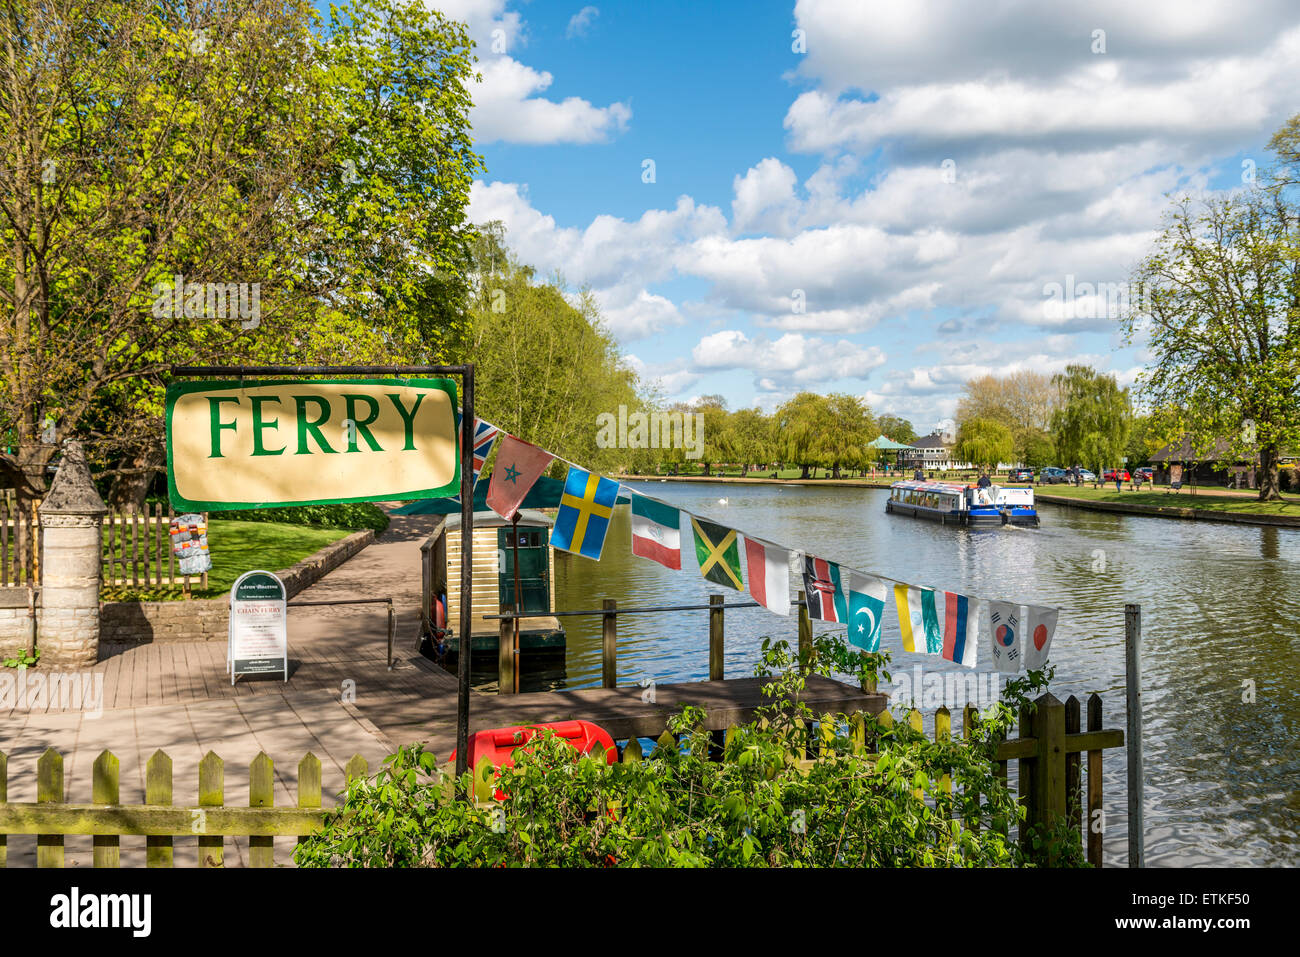 Site of the original Ferry crossing on the River Avon in Stratford upon Avon Stock Photo